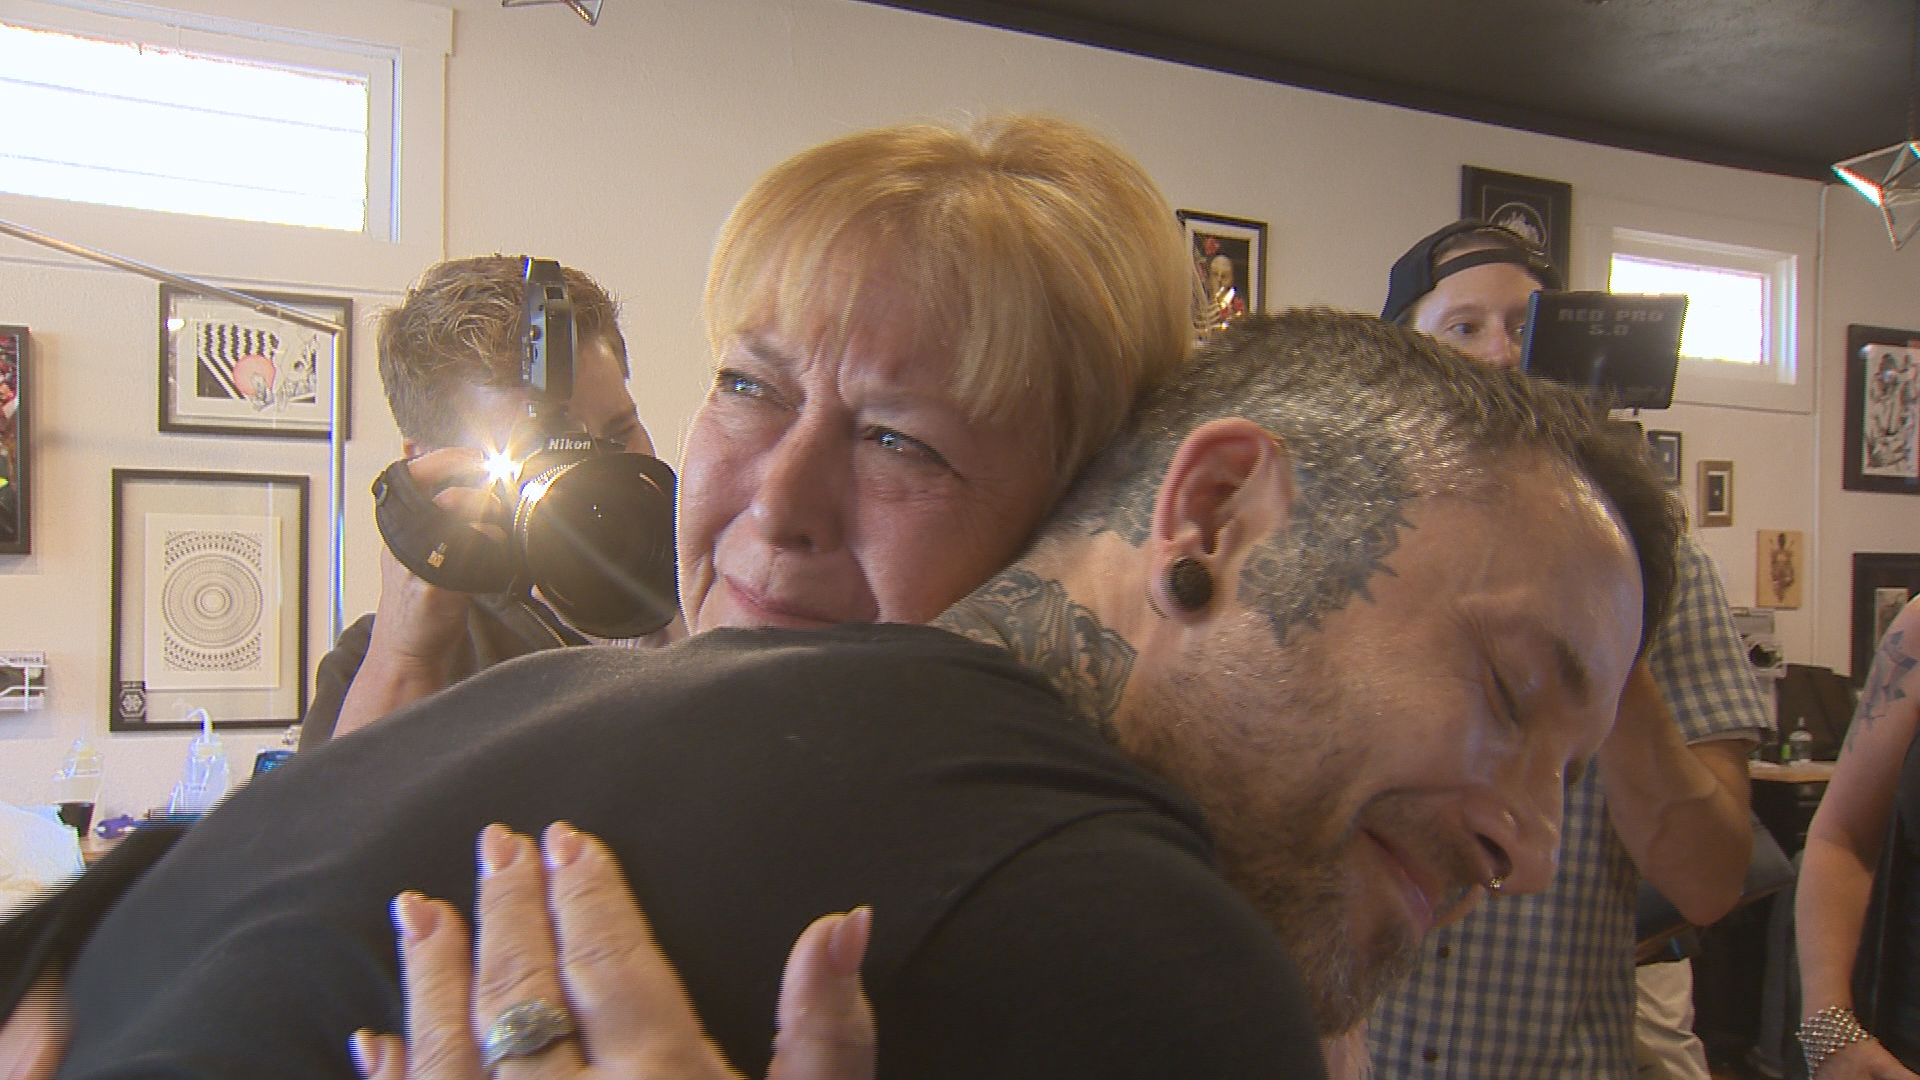 Tattoo artists give free tattoos to breast cancer survivors